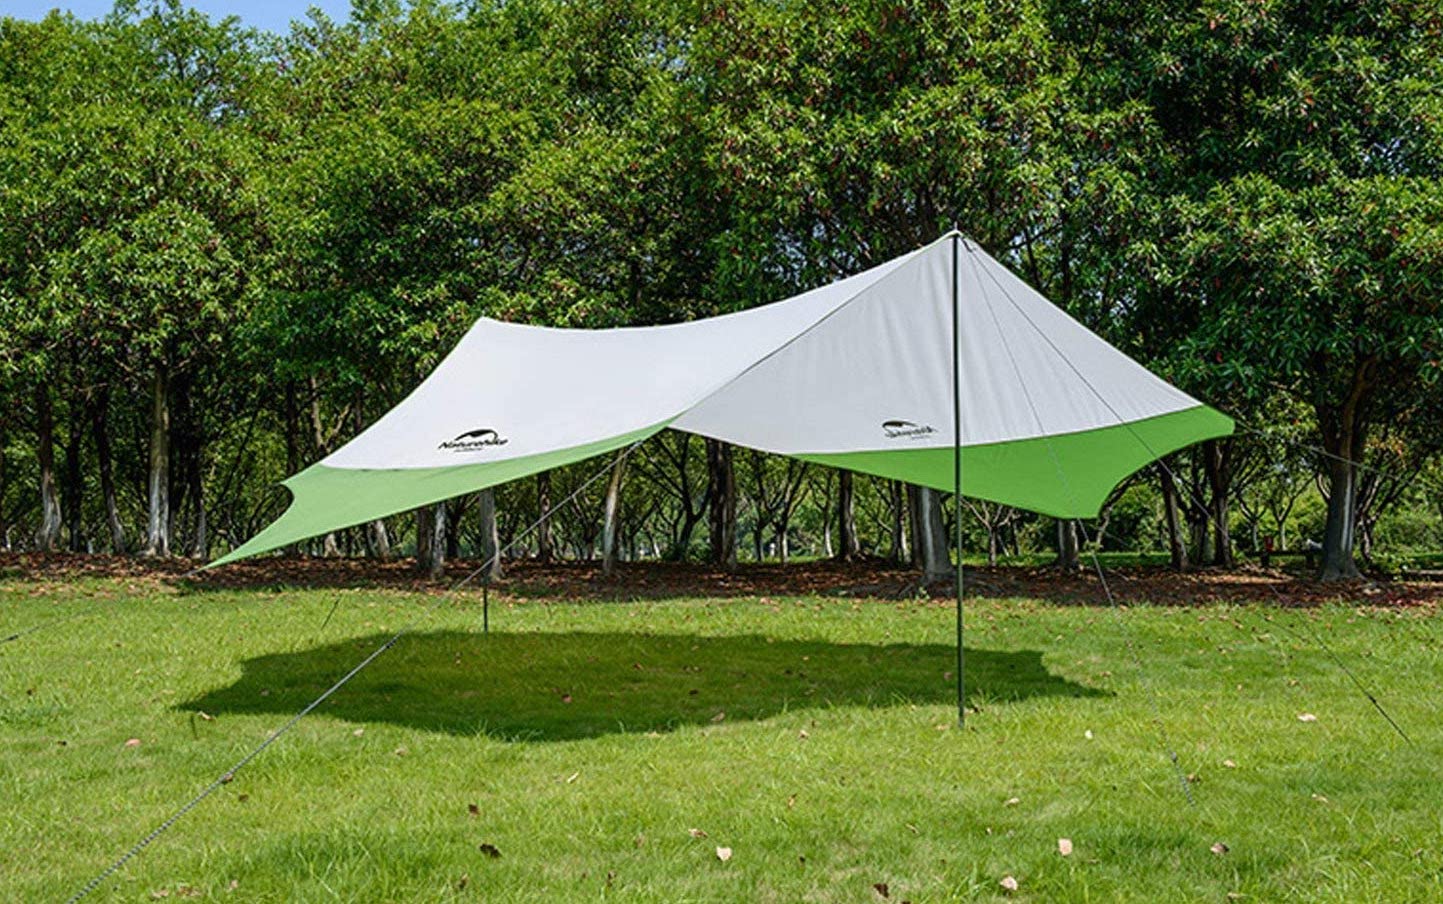 Top 10 Best Tarp Shelters in 2022 - Top Best Product Reviews